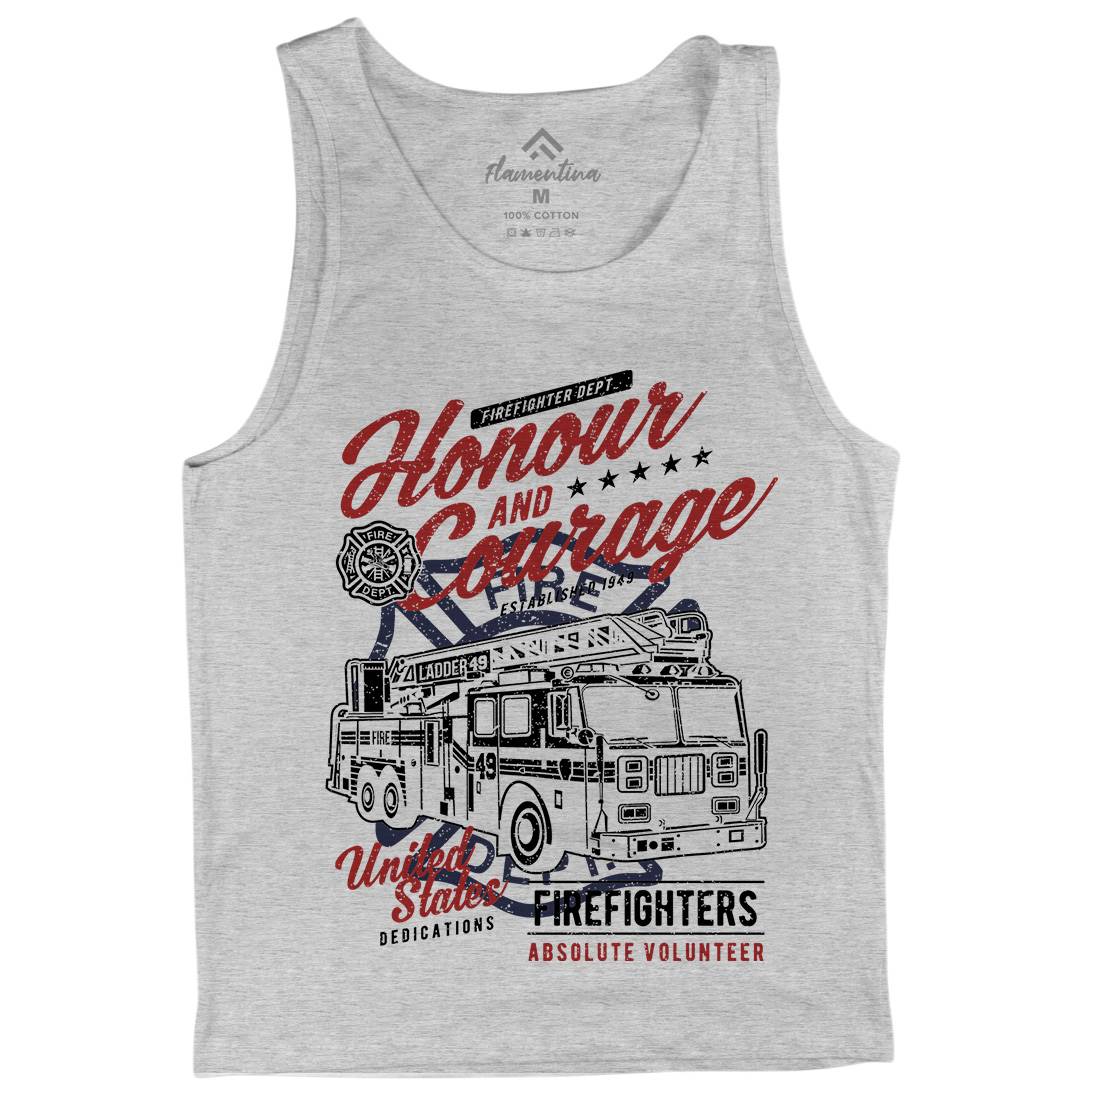 Honour And Courage Mens Tank Top Vest Firefighters A684